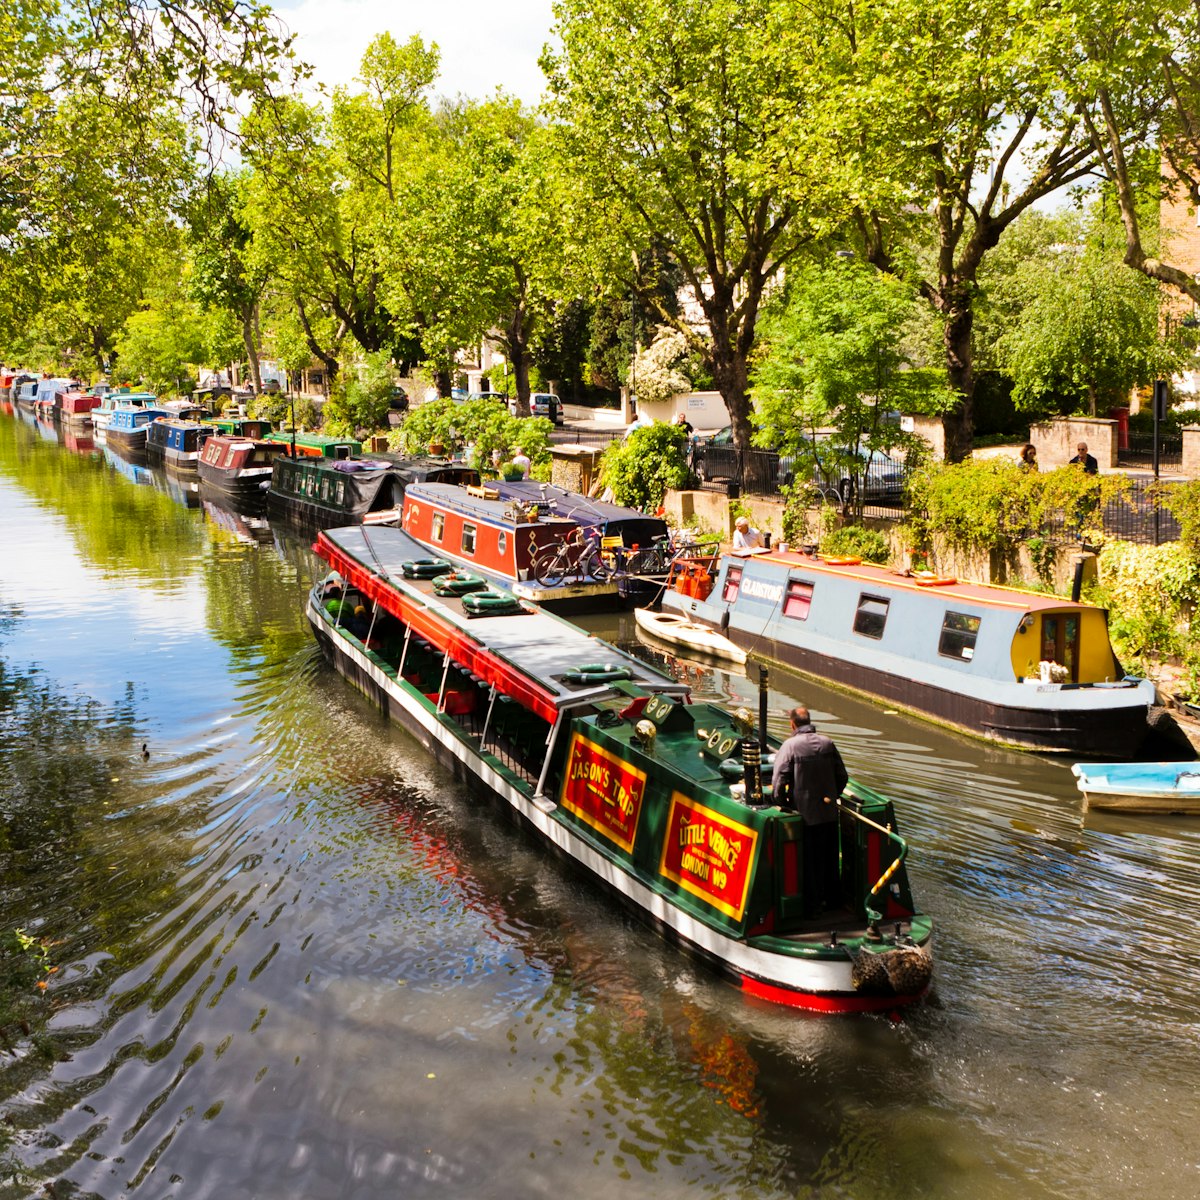 A boat sailing on Regent's Canal in Little Venice, London, England.